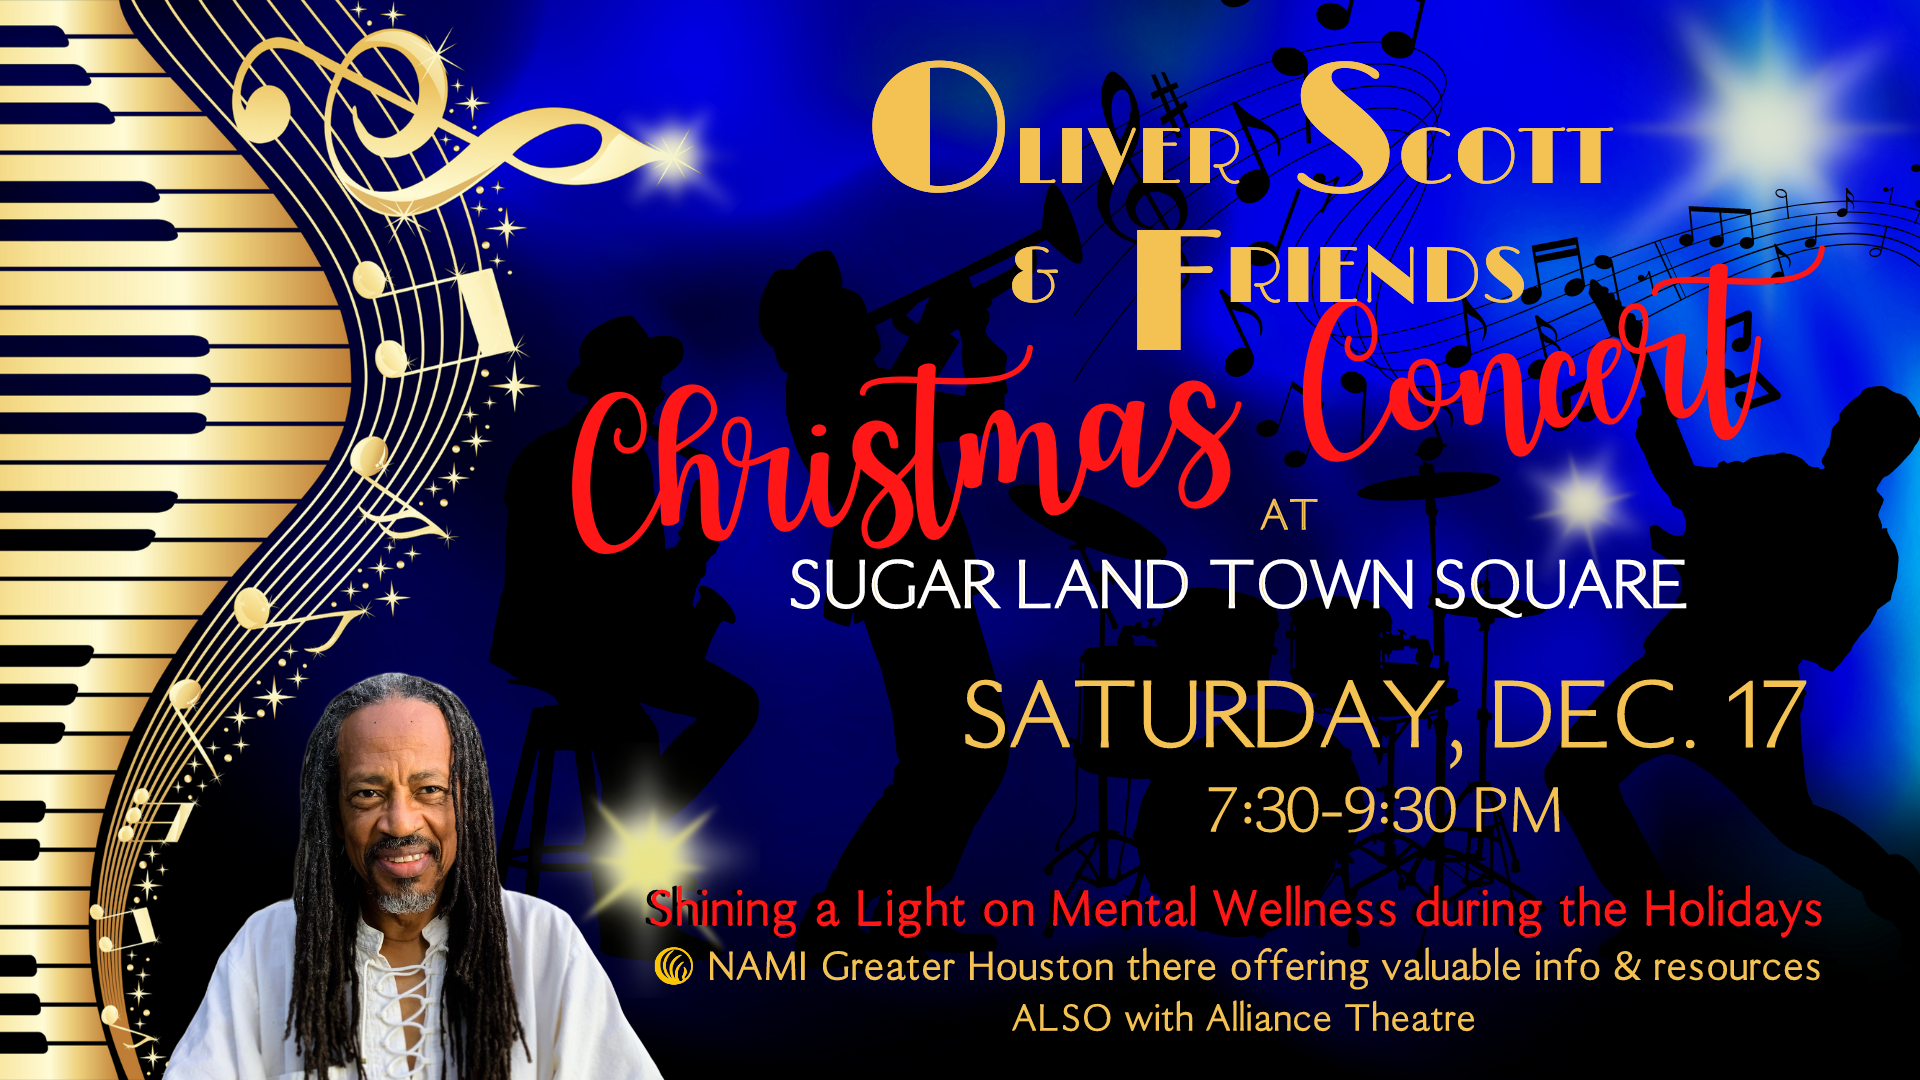 Oliver Scott & Friends at Sugar Land Town Square